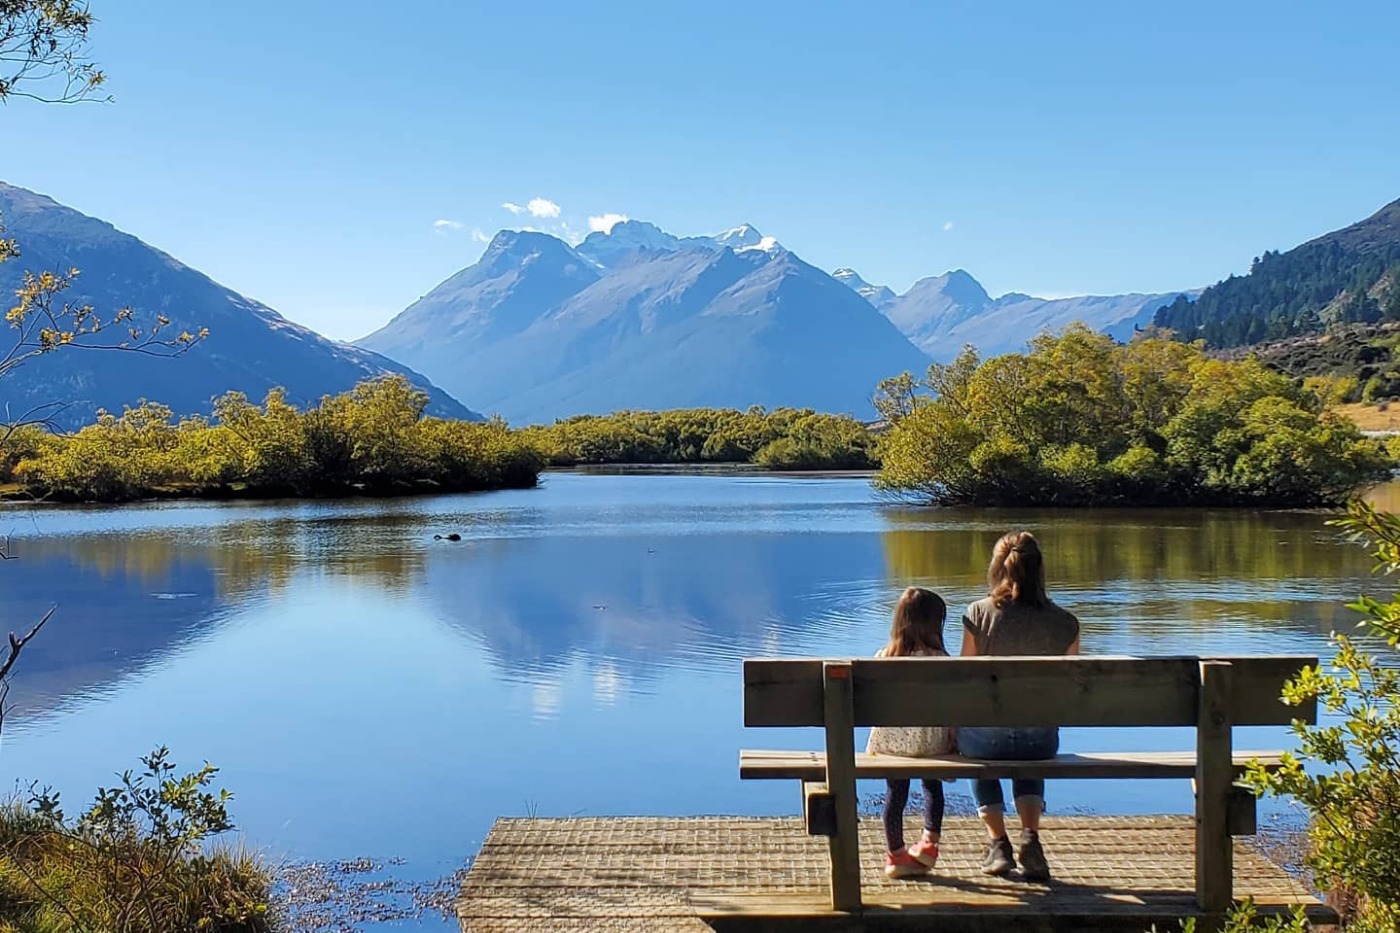 Mum and daughter sitting by lake with view of mountains in the background